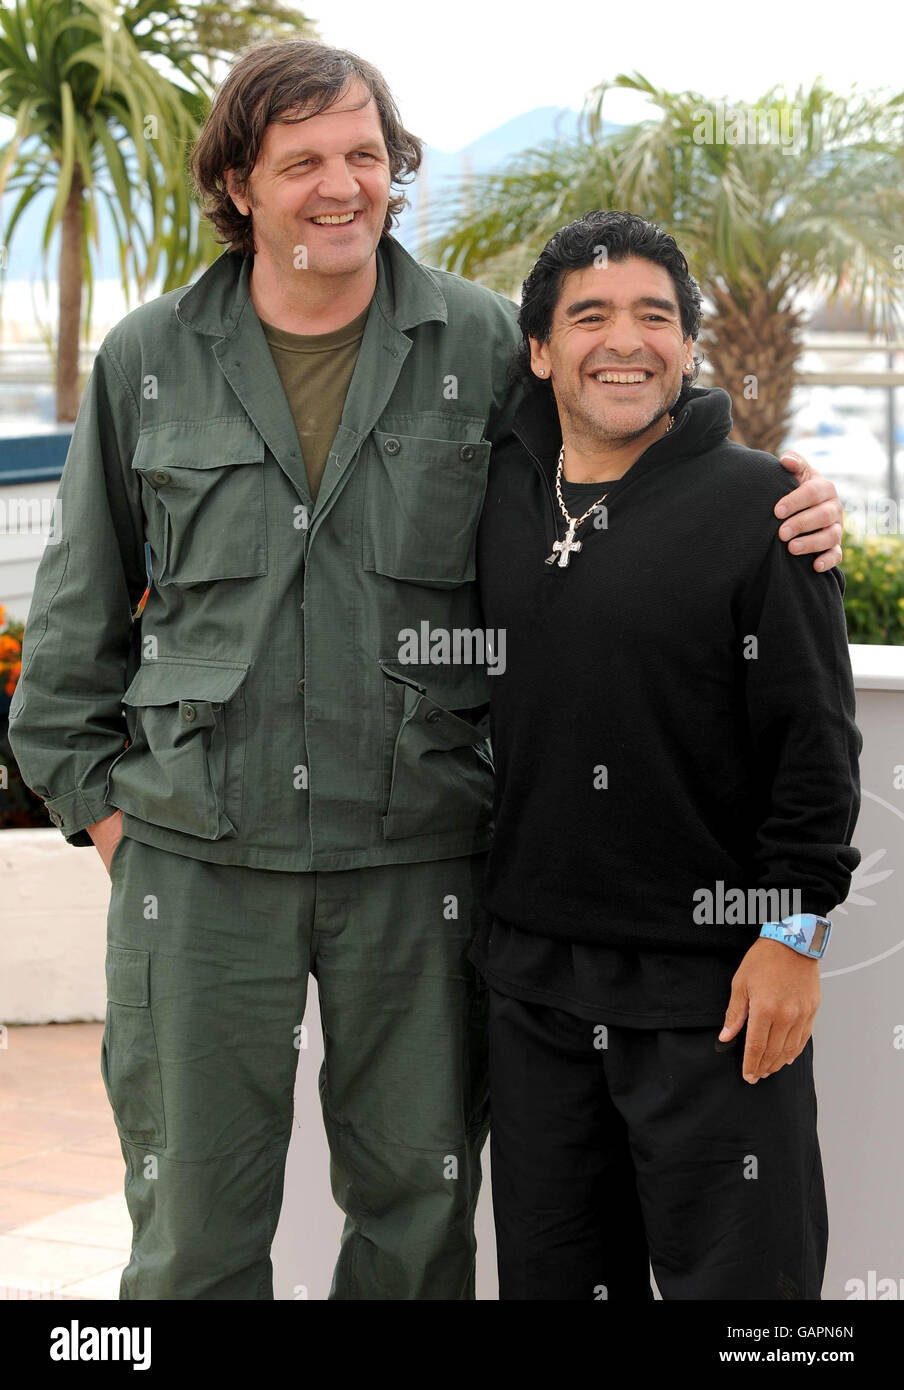 Maradona attends a photocall for the film 'Maradona' by Emir Kusturica (left) during the 61st Cannes Film Festival in France. Stock Photo